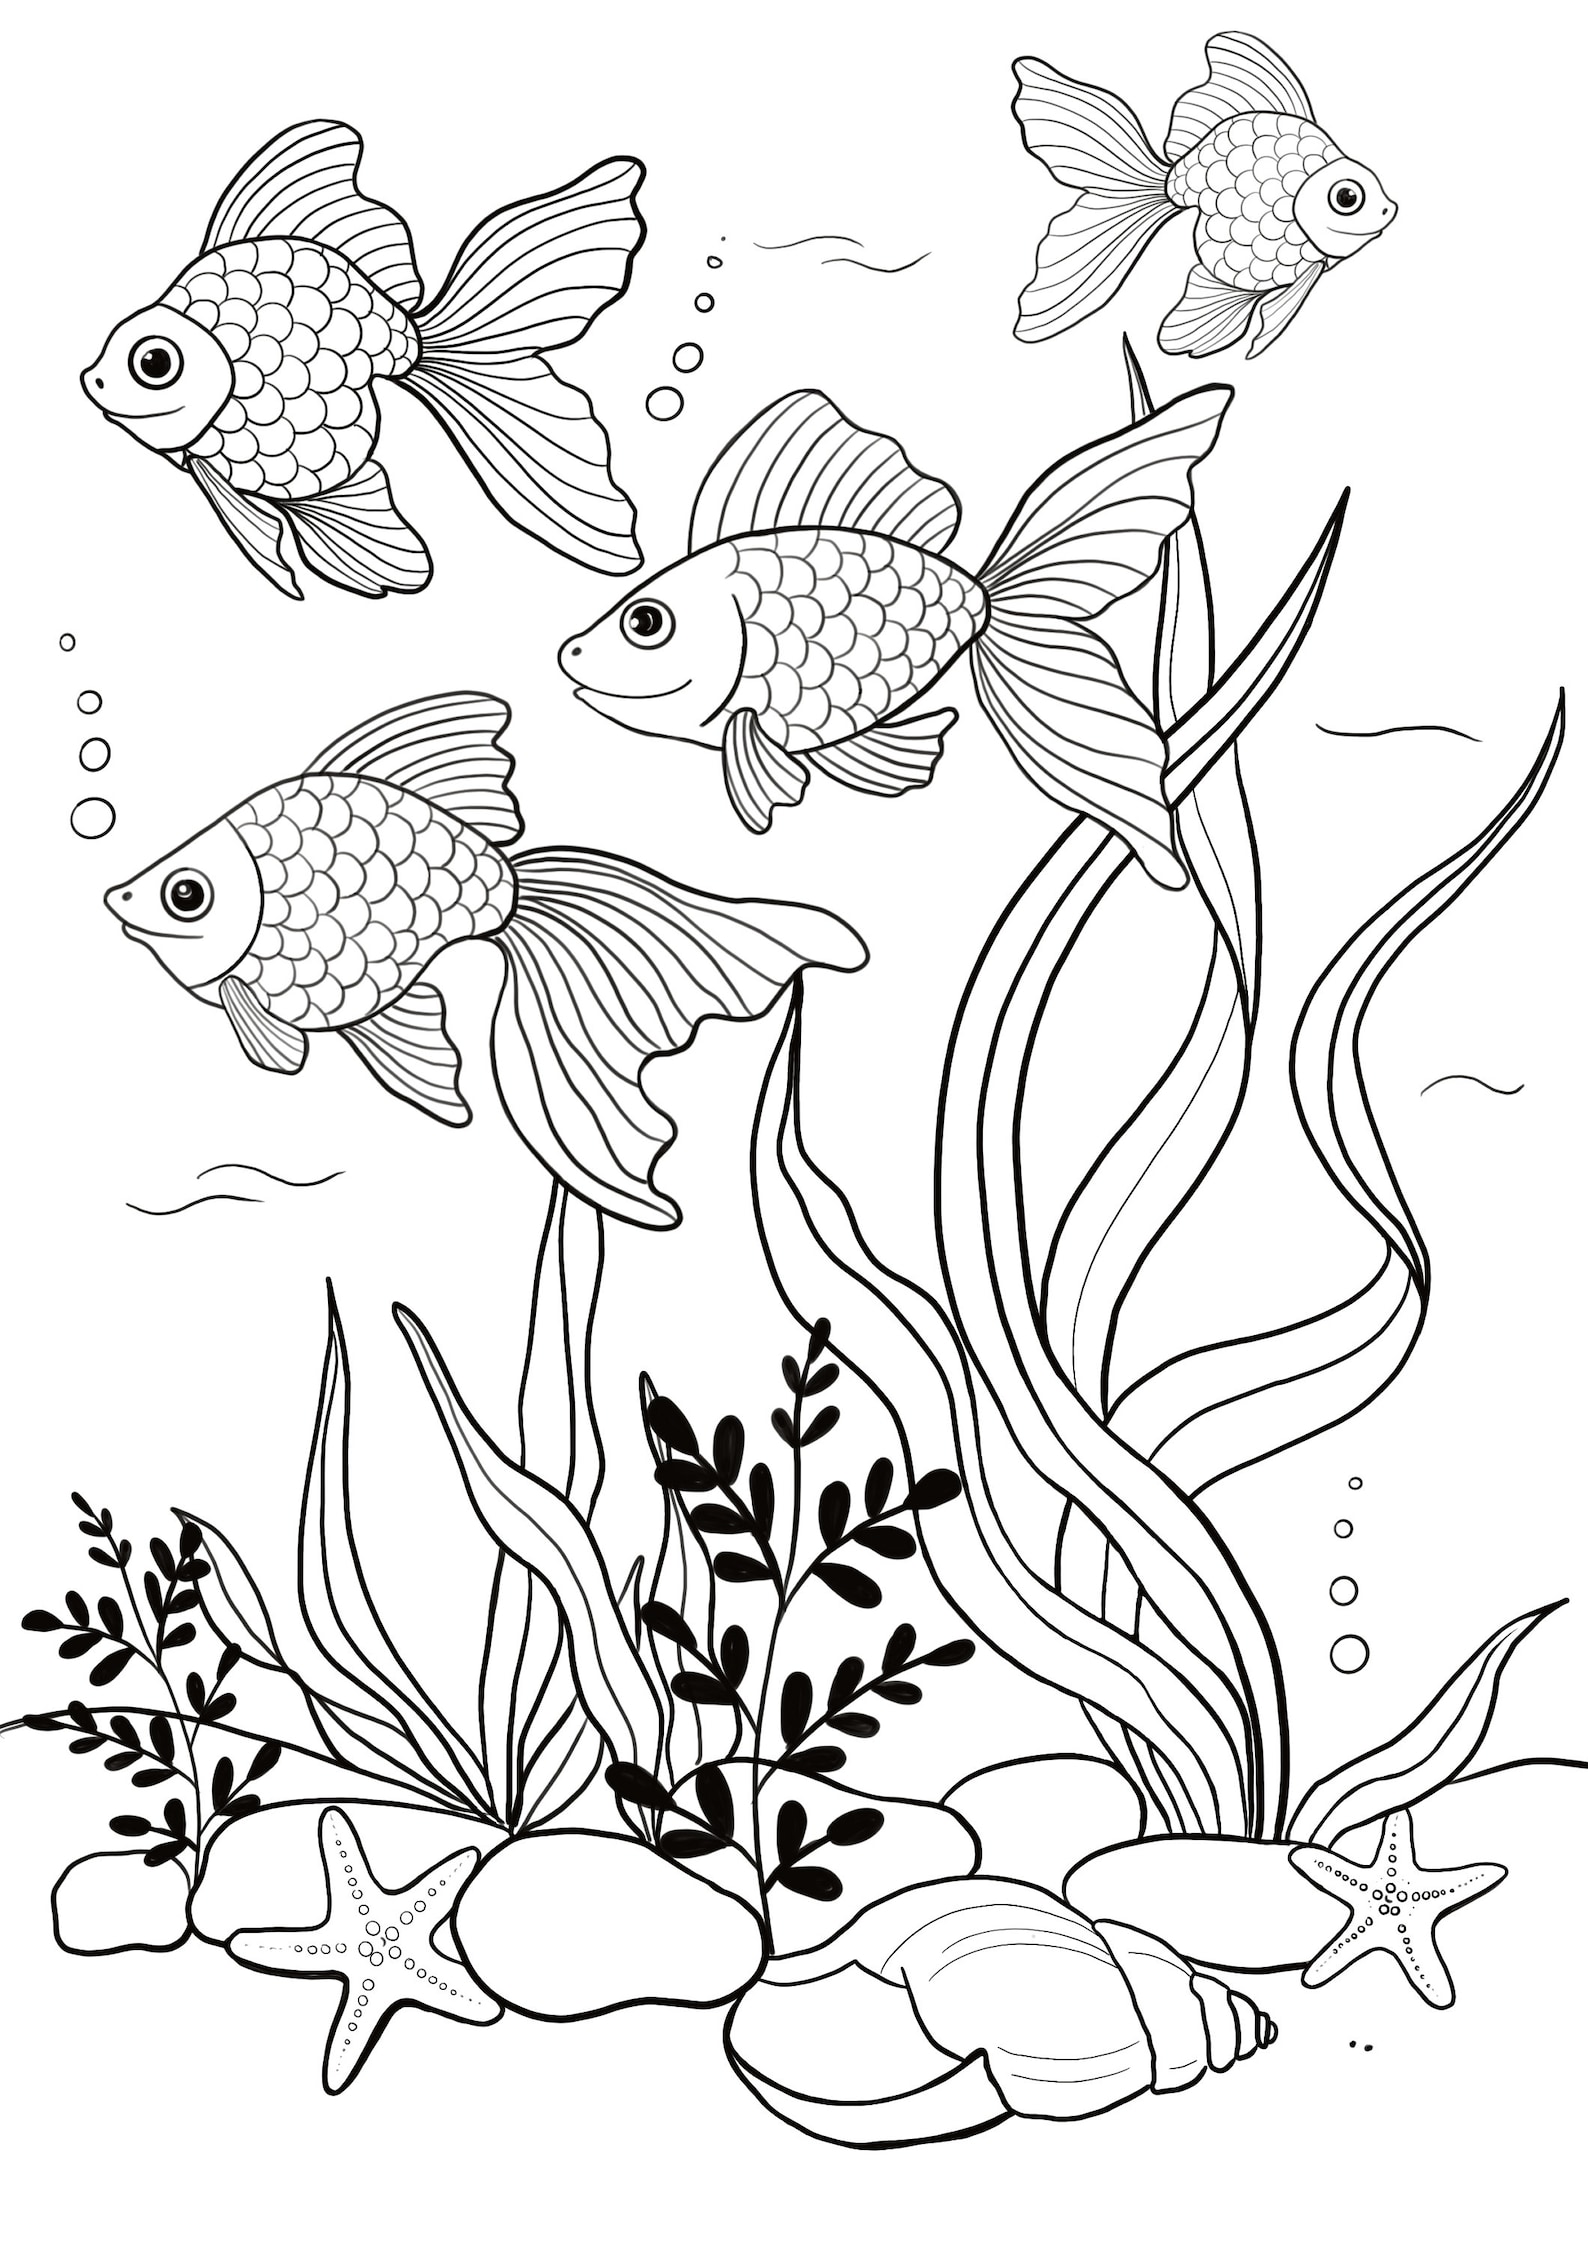 Underwater Sea Life Printable Coloring Sheet Coloring Pages Etsy